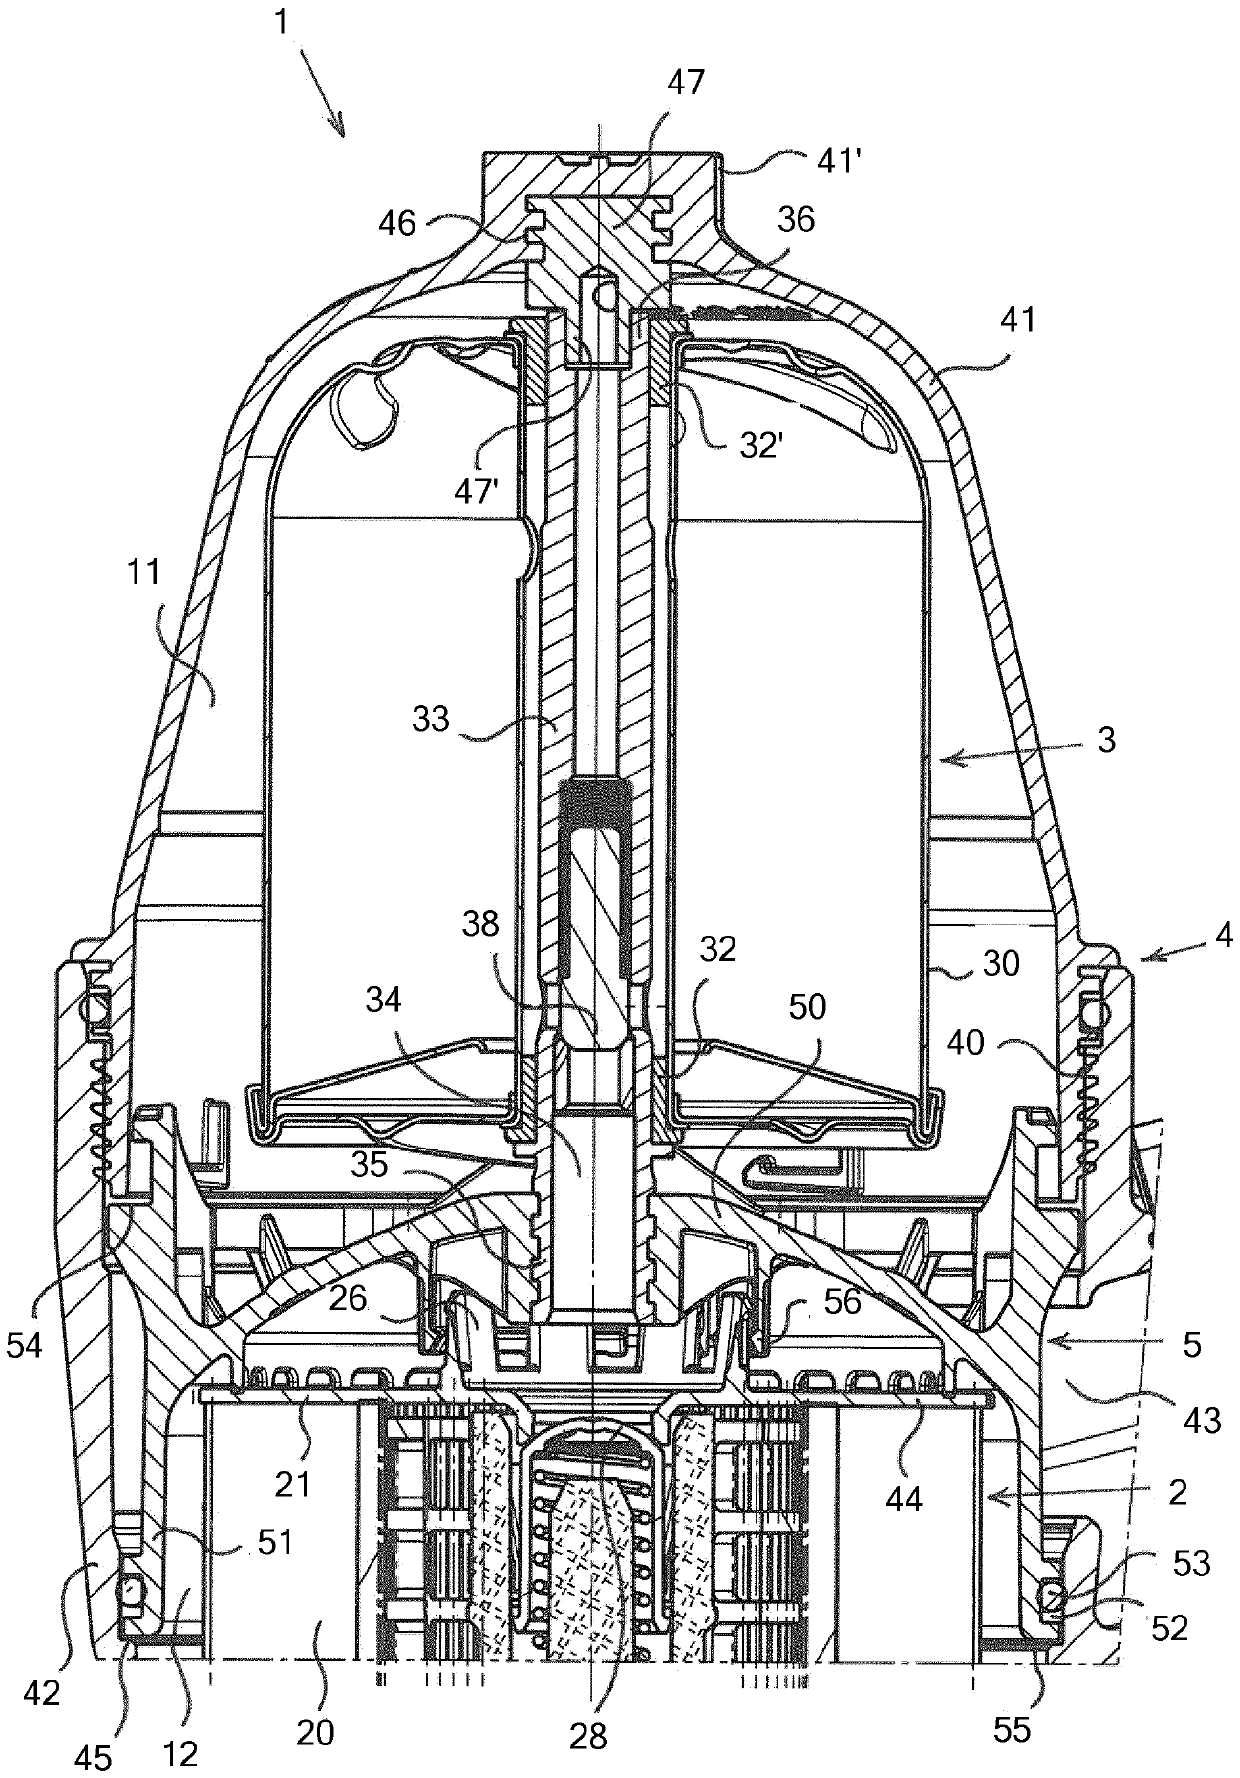 Device for removing impurities from lubricating oil for internal combustion engines